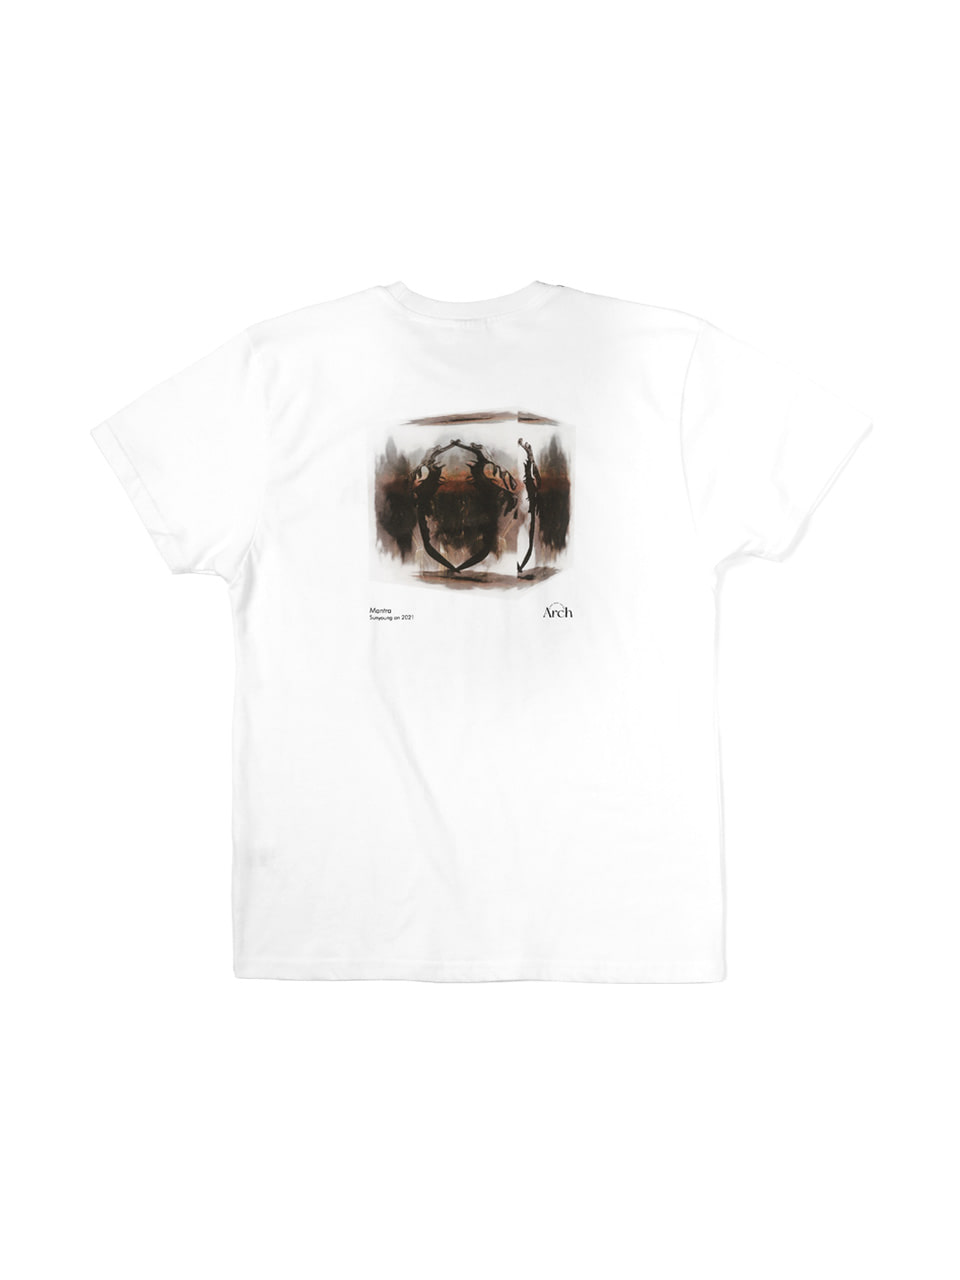 Sunyoung an Mantra #1 short sleeve T-shirt white